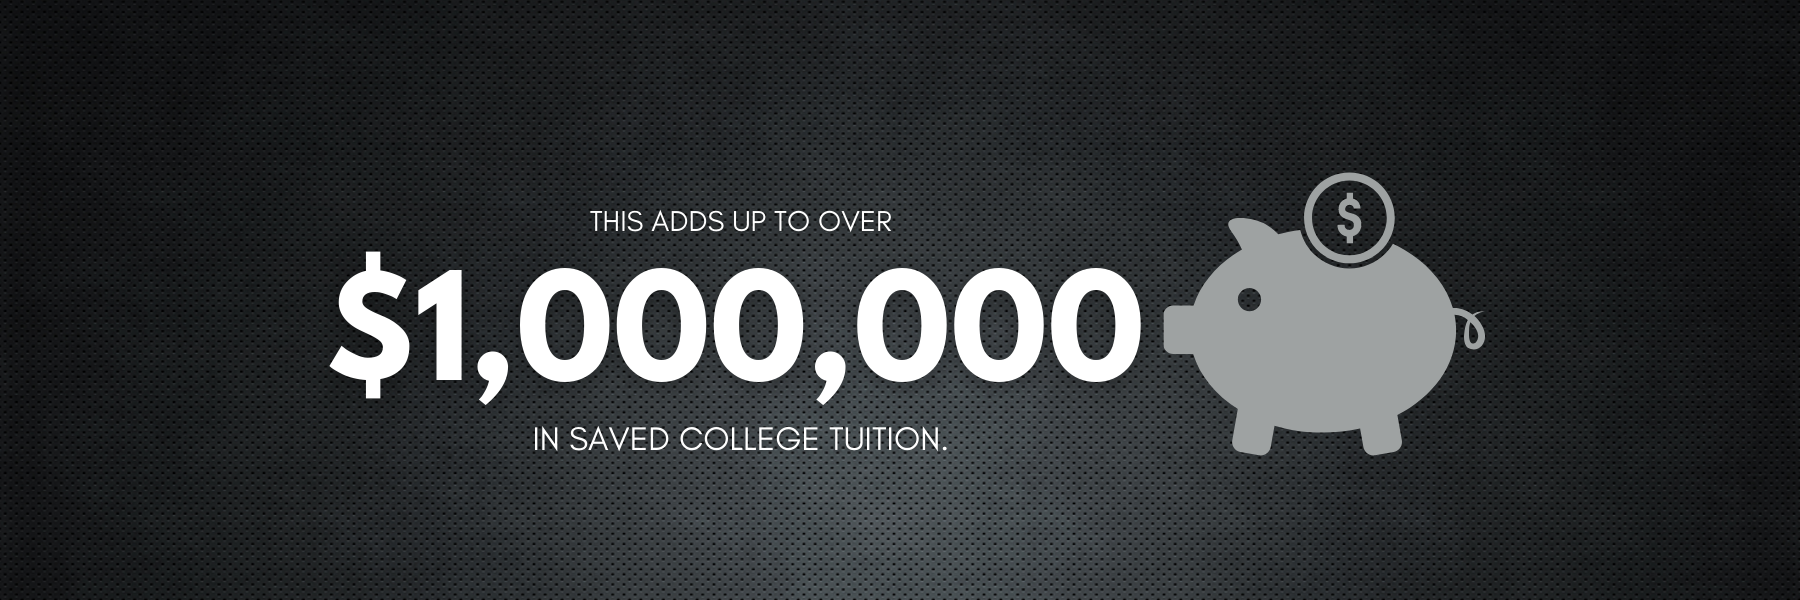 This adds up to over $1,000,000 in saved college tuition.